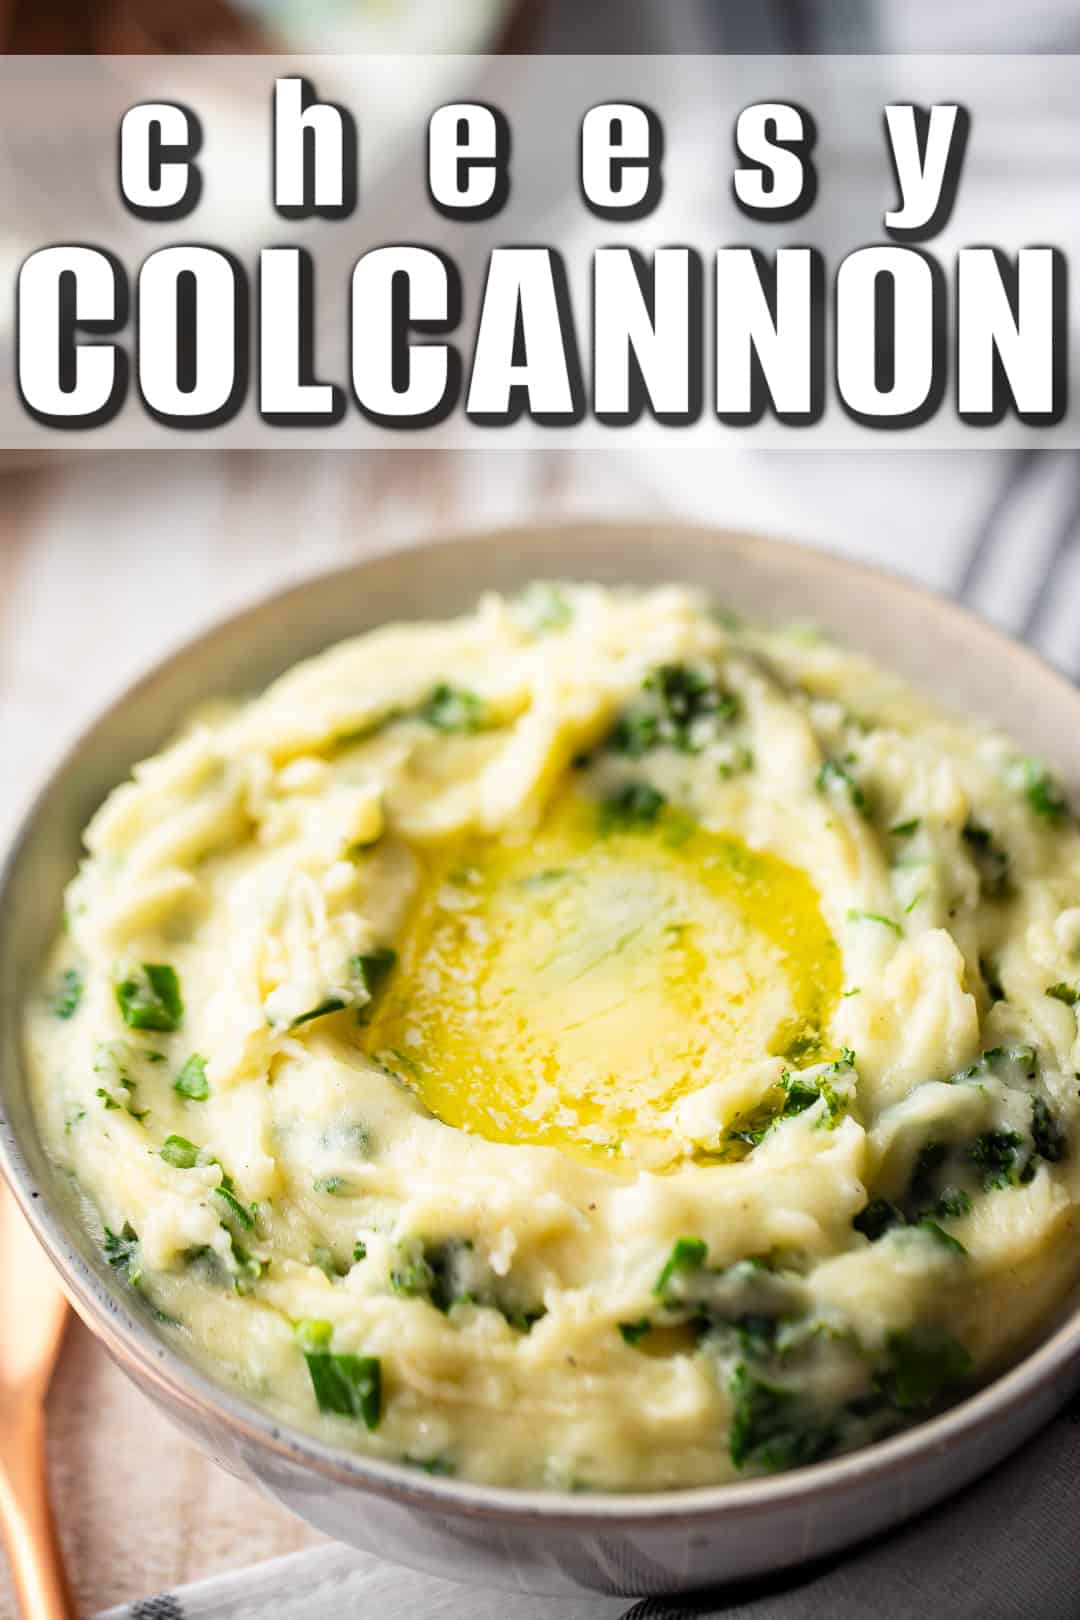 Colcannon recipe with sharp cheddar cheese added.